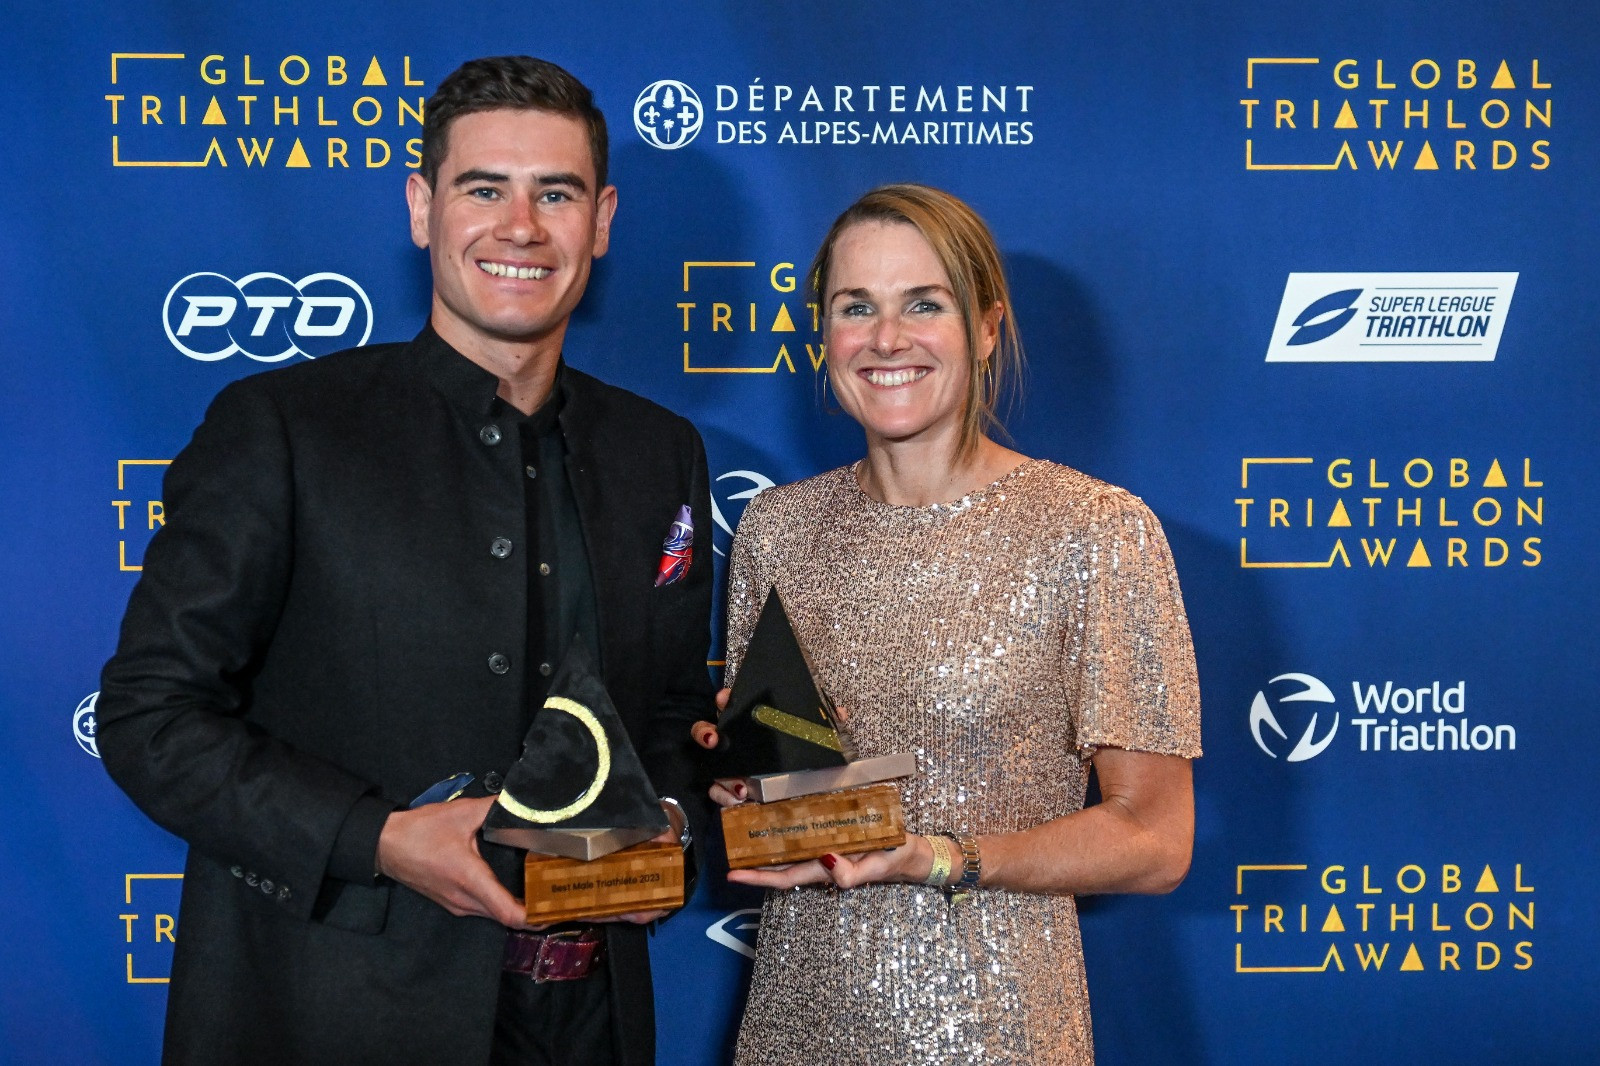 Duffy and Iden named athletes of the year at Global Triathlon Awards